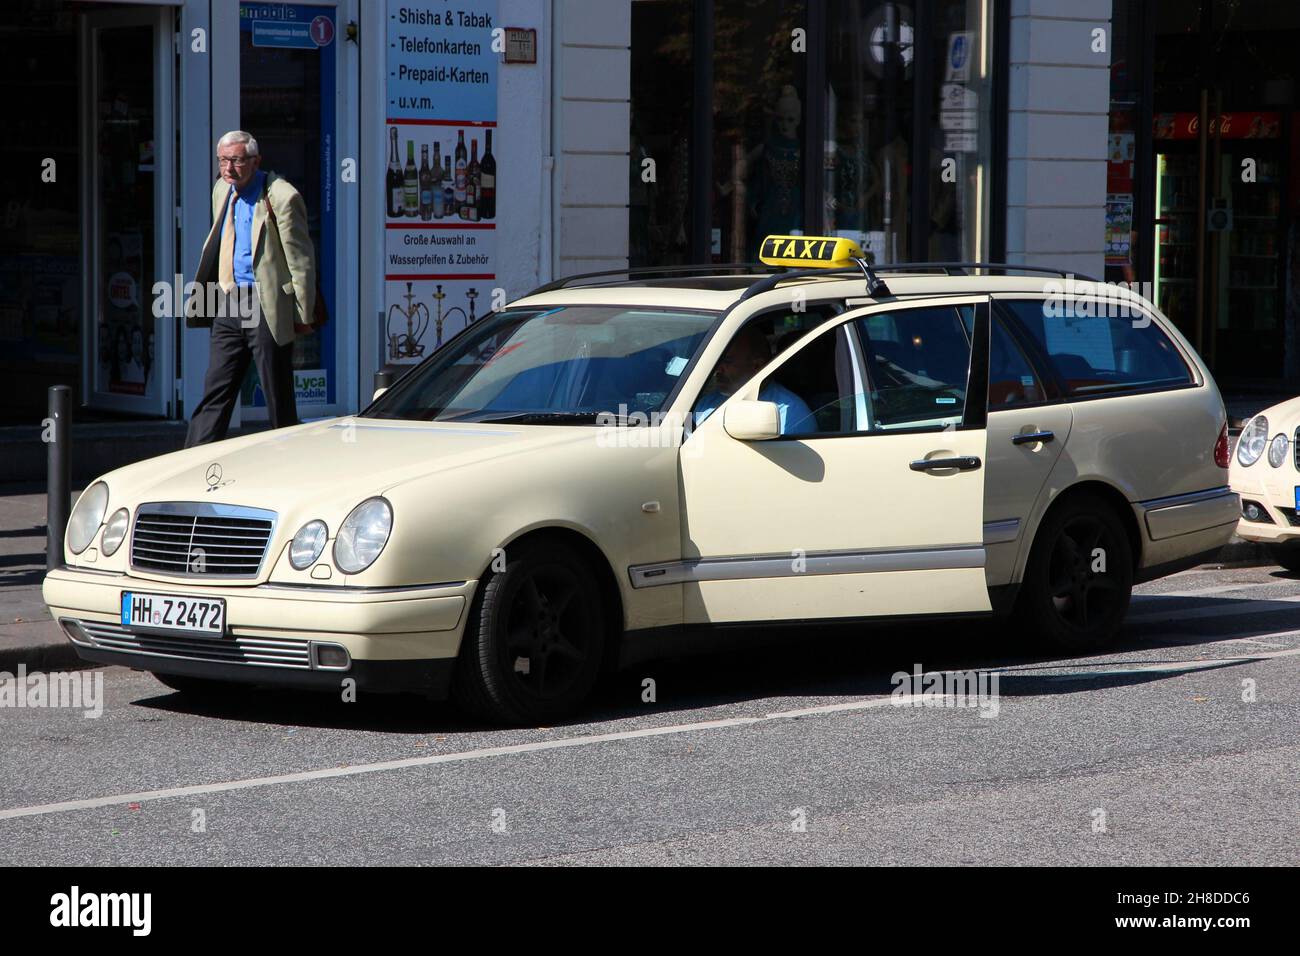 Page 3 - Mercedes Taxi High Resolution Stock Photography and Images - Alamy